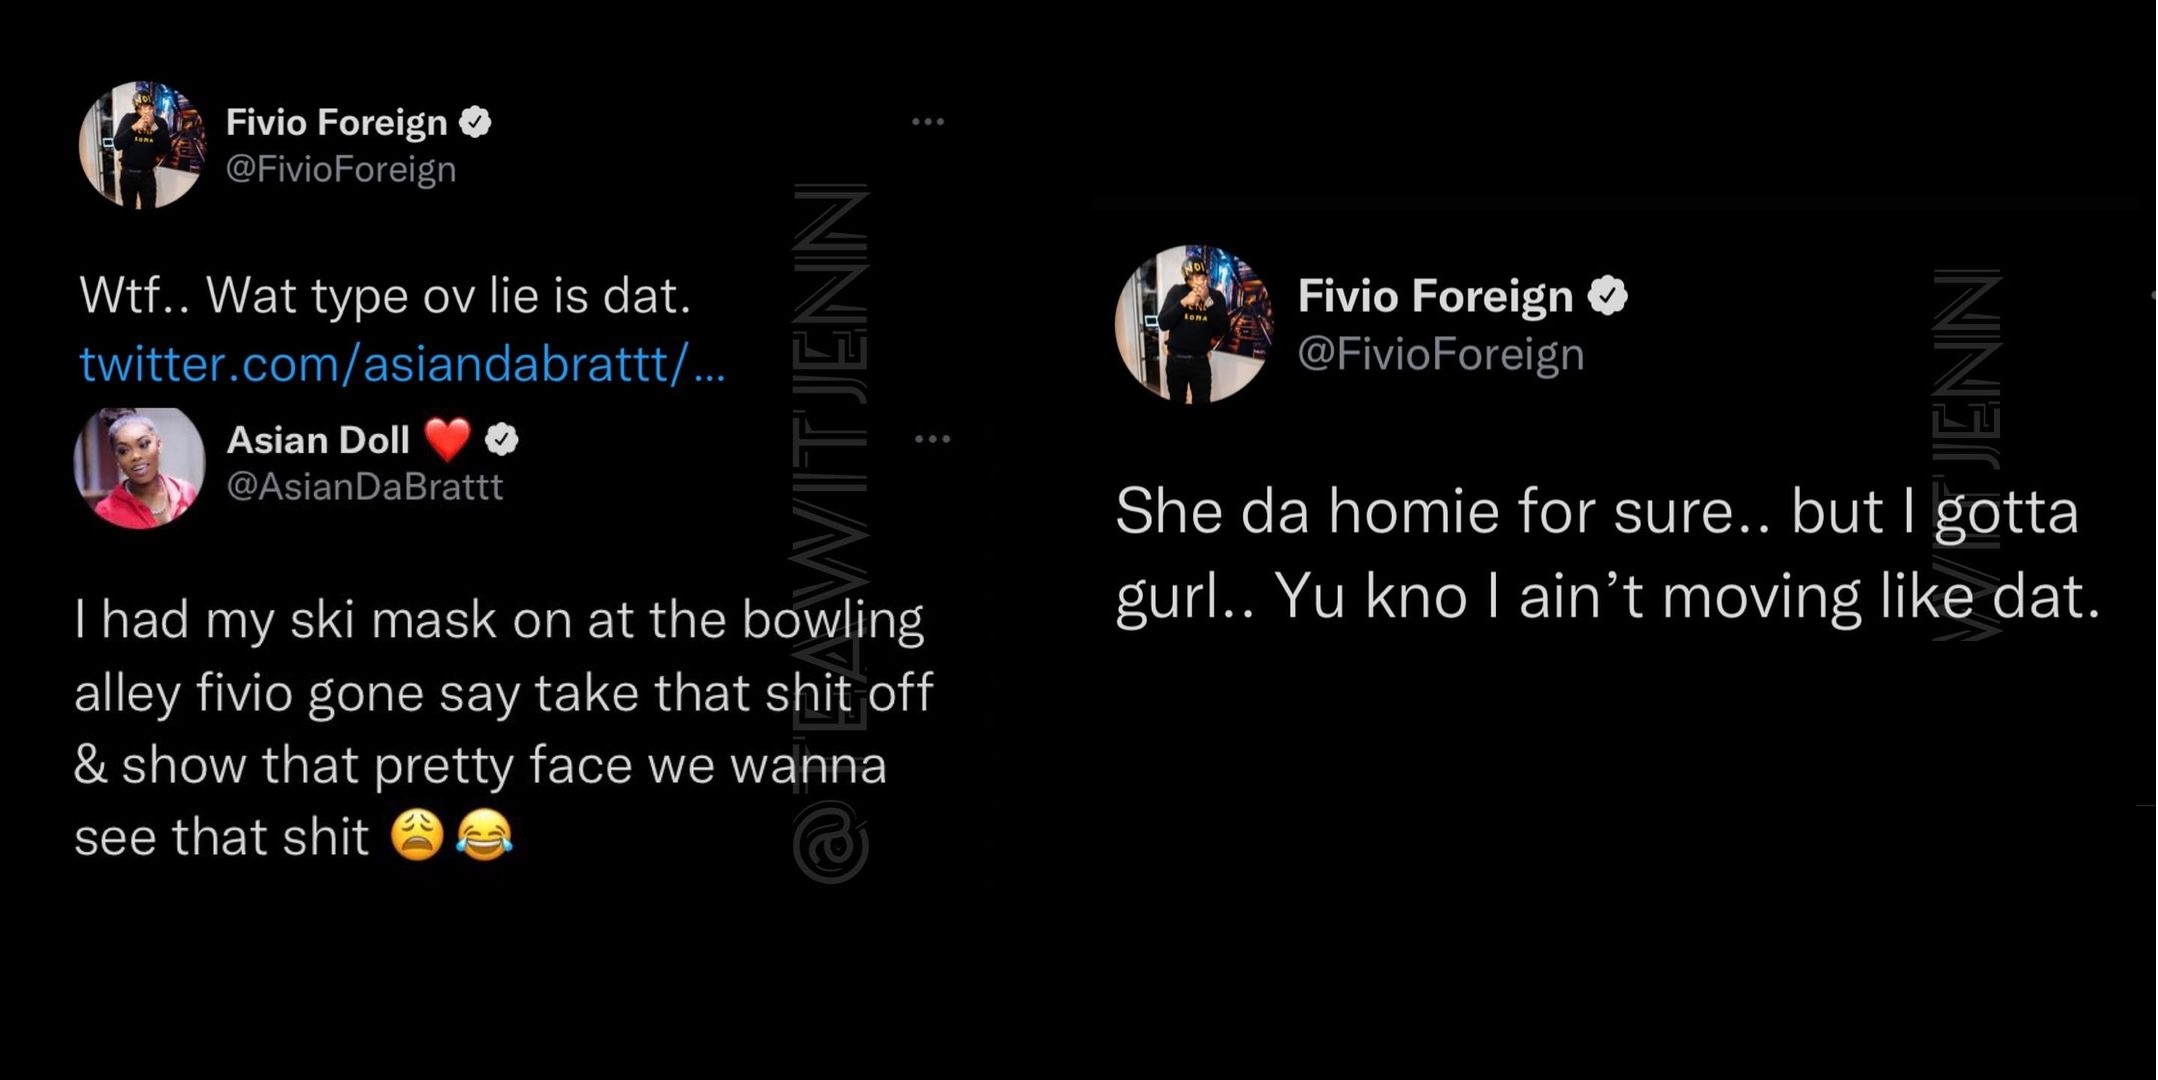 Asian Doll says she went out with Fivio Foreign and he denies it